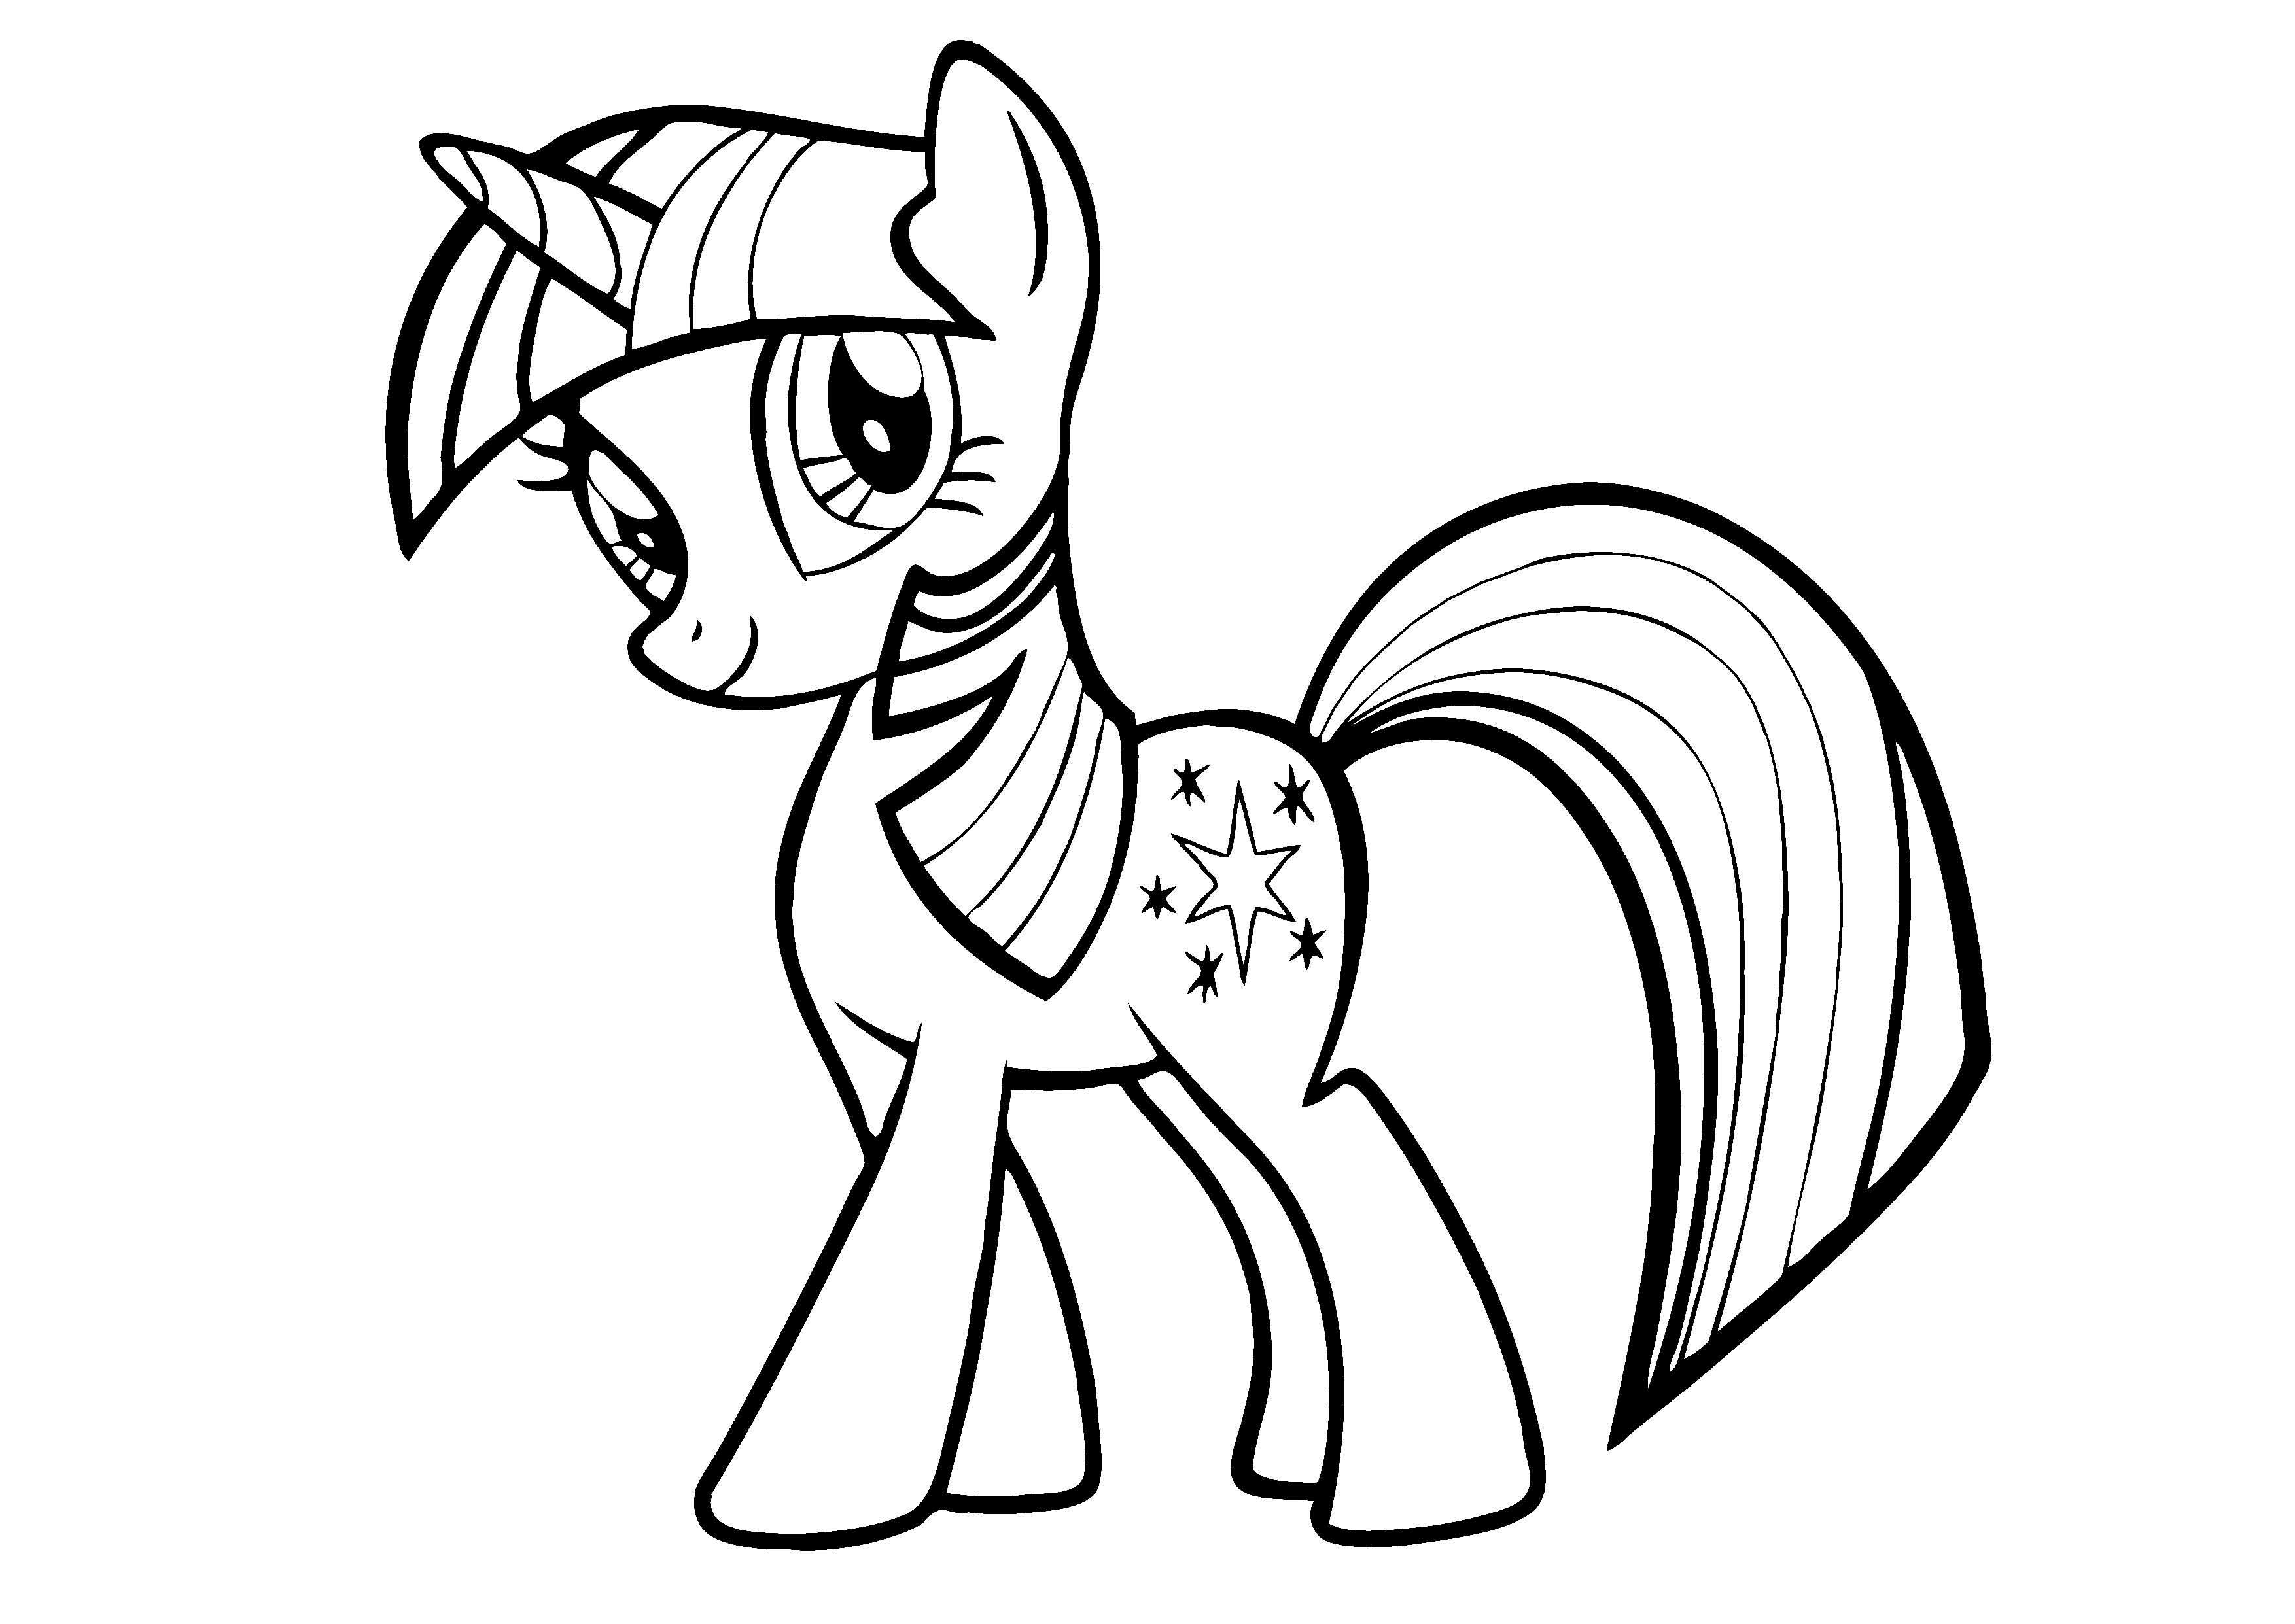 My Little Pony Colouring Sheets   Twilight Sparkle   My Little ...